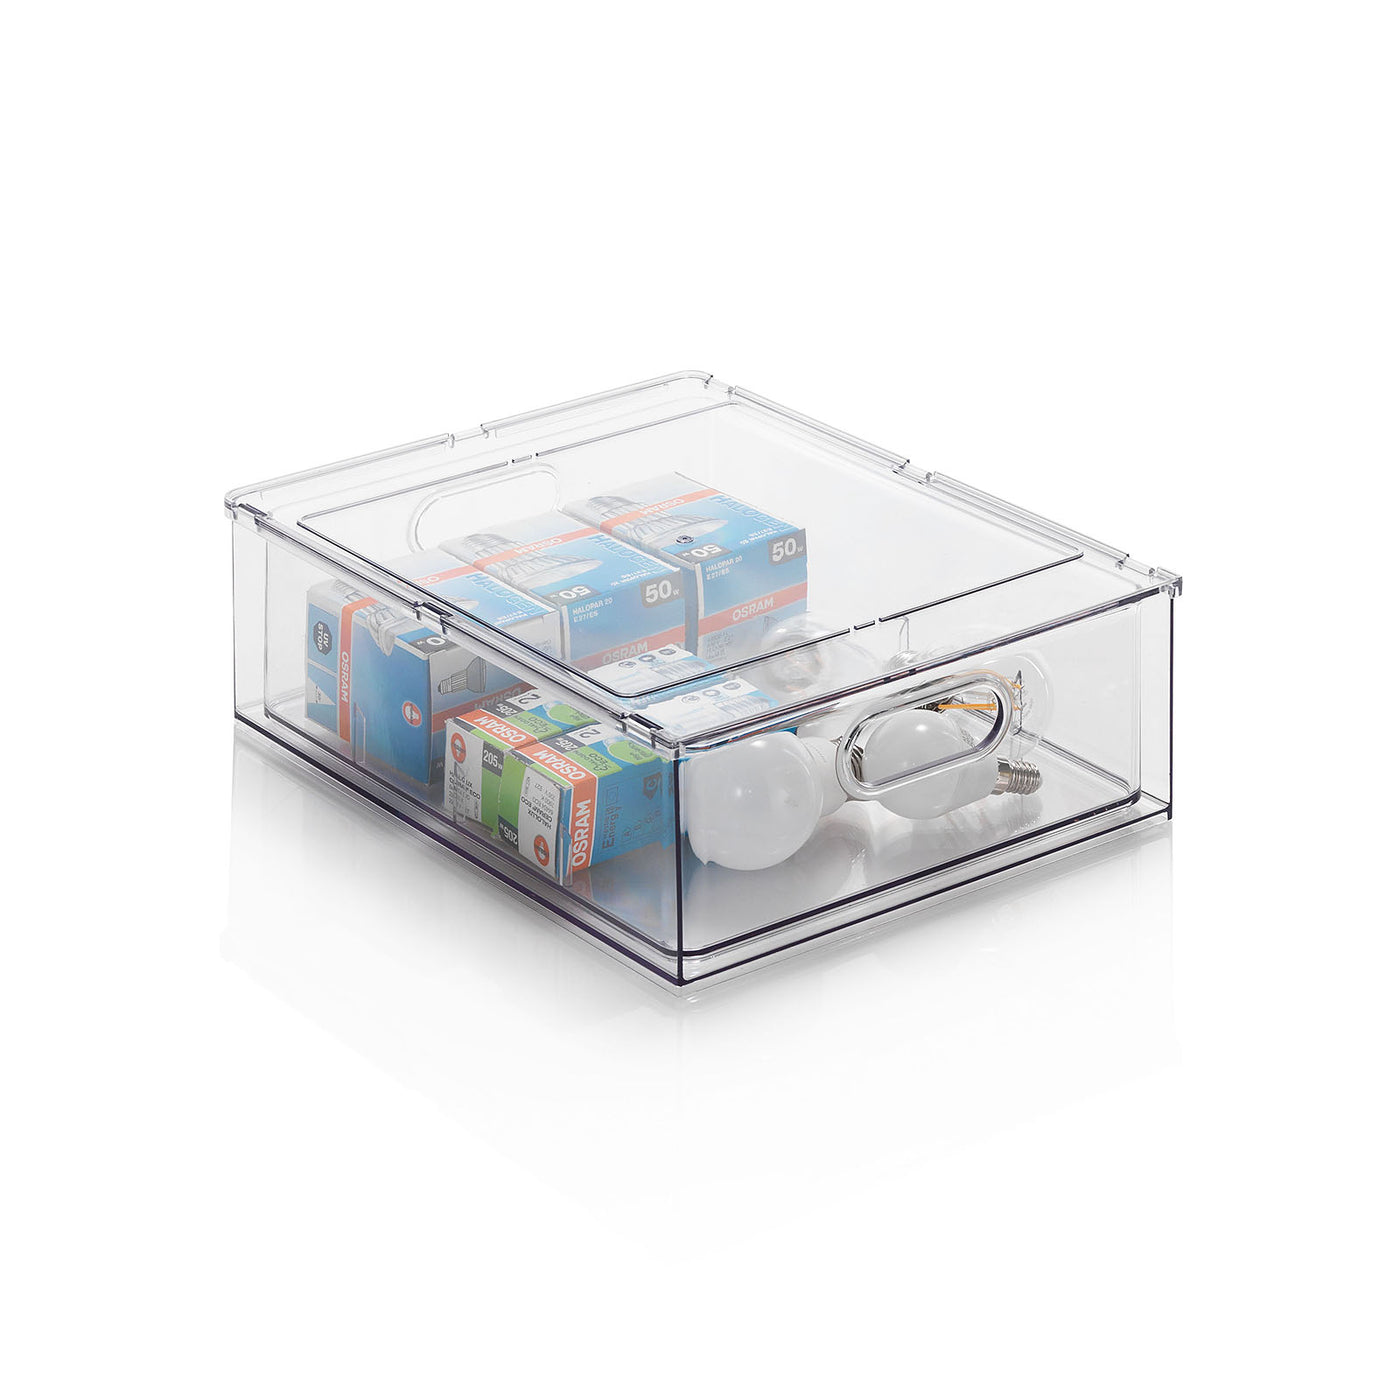 KRAU extractable drawer/container